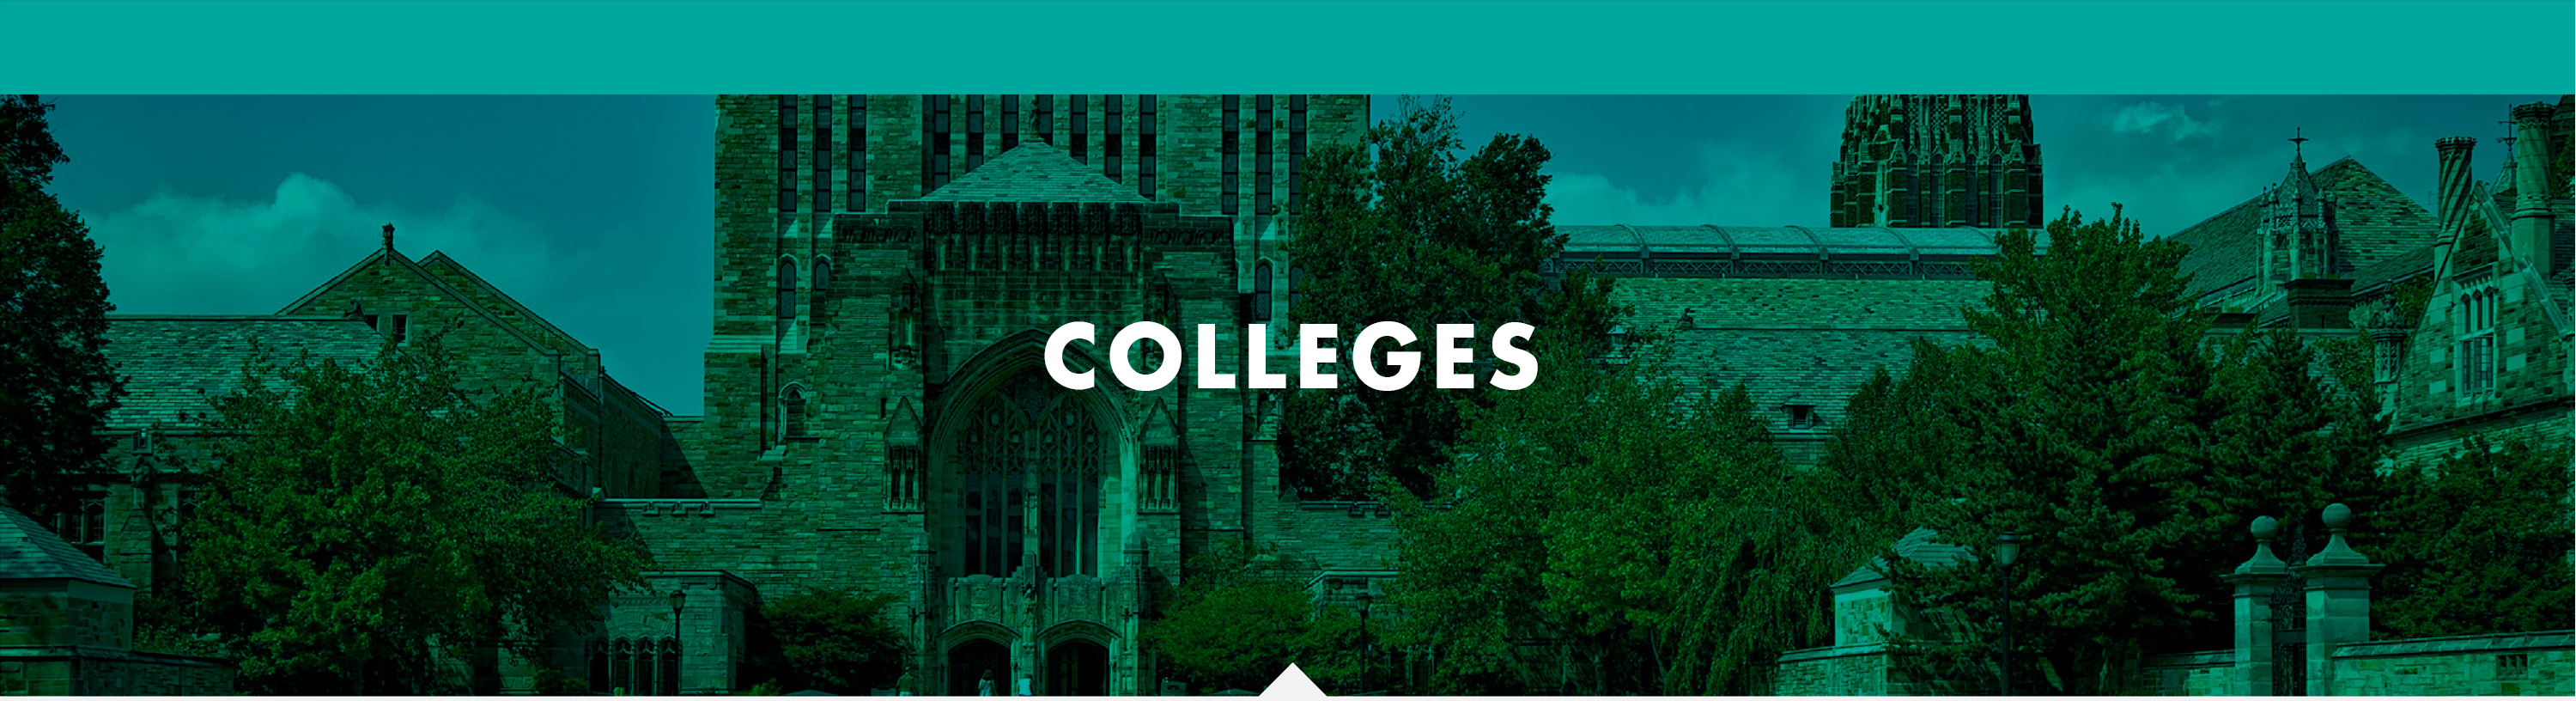 colleges_small